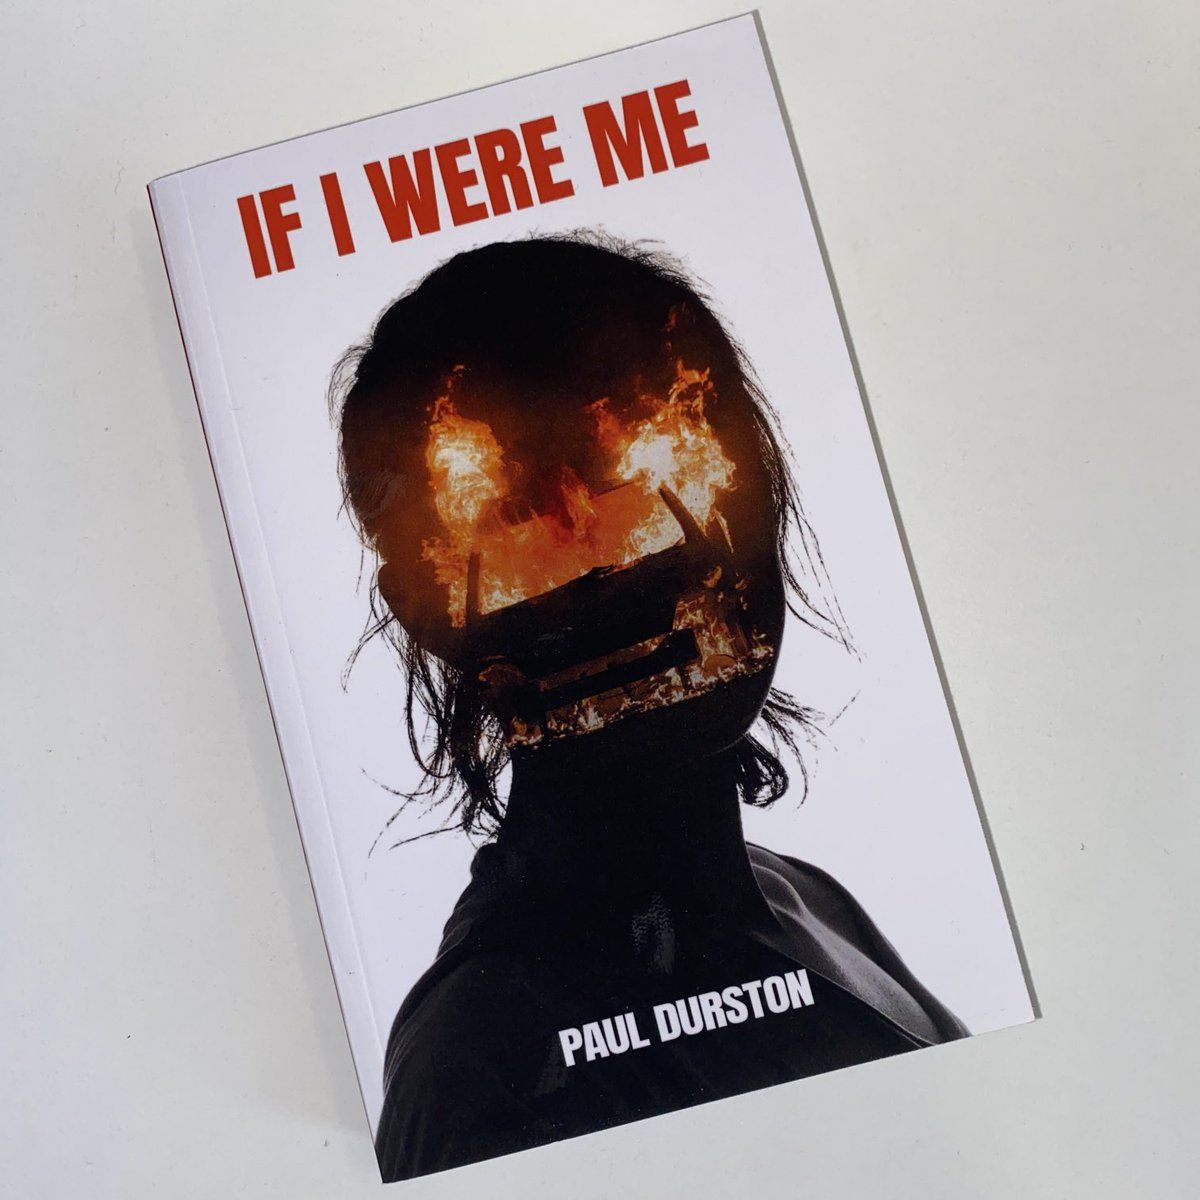 If I Were Me by Paul Durston.

The only person who can free Charlie from this nightmare, is herself. But what will she find on the far side of her memory?

#CrimeFiction #DiamondCrime #PsychologicalThriller #DebutNovel